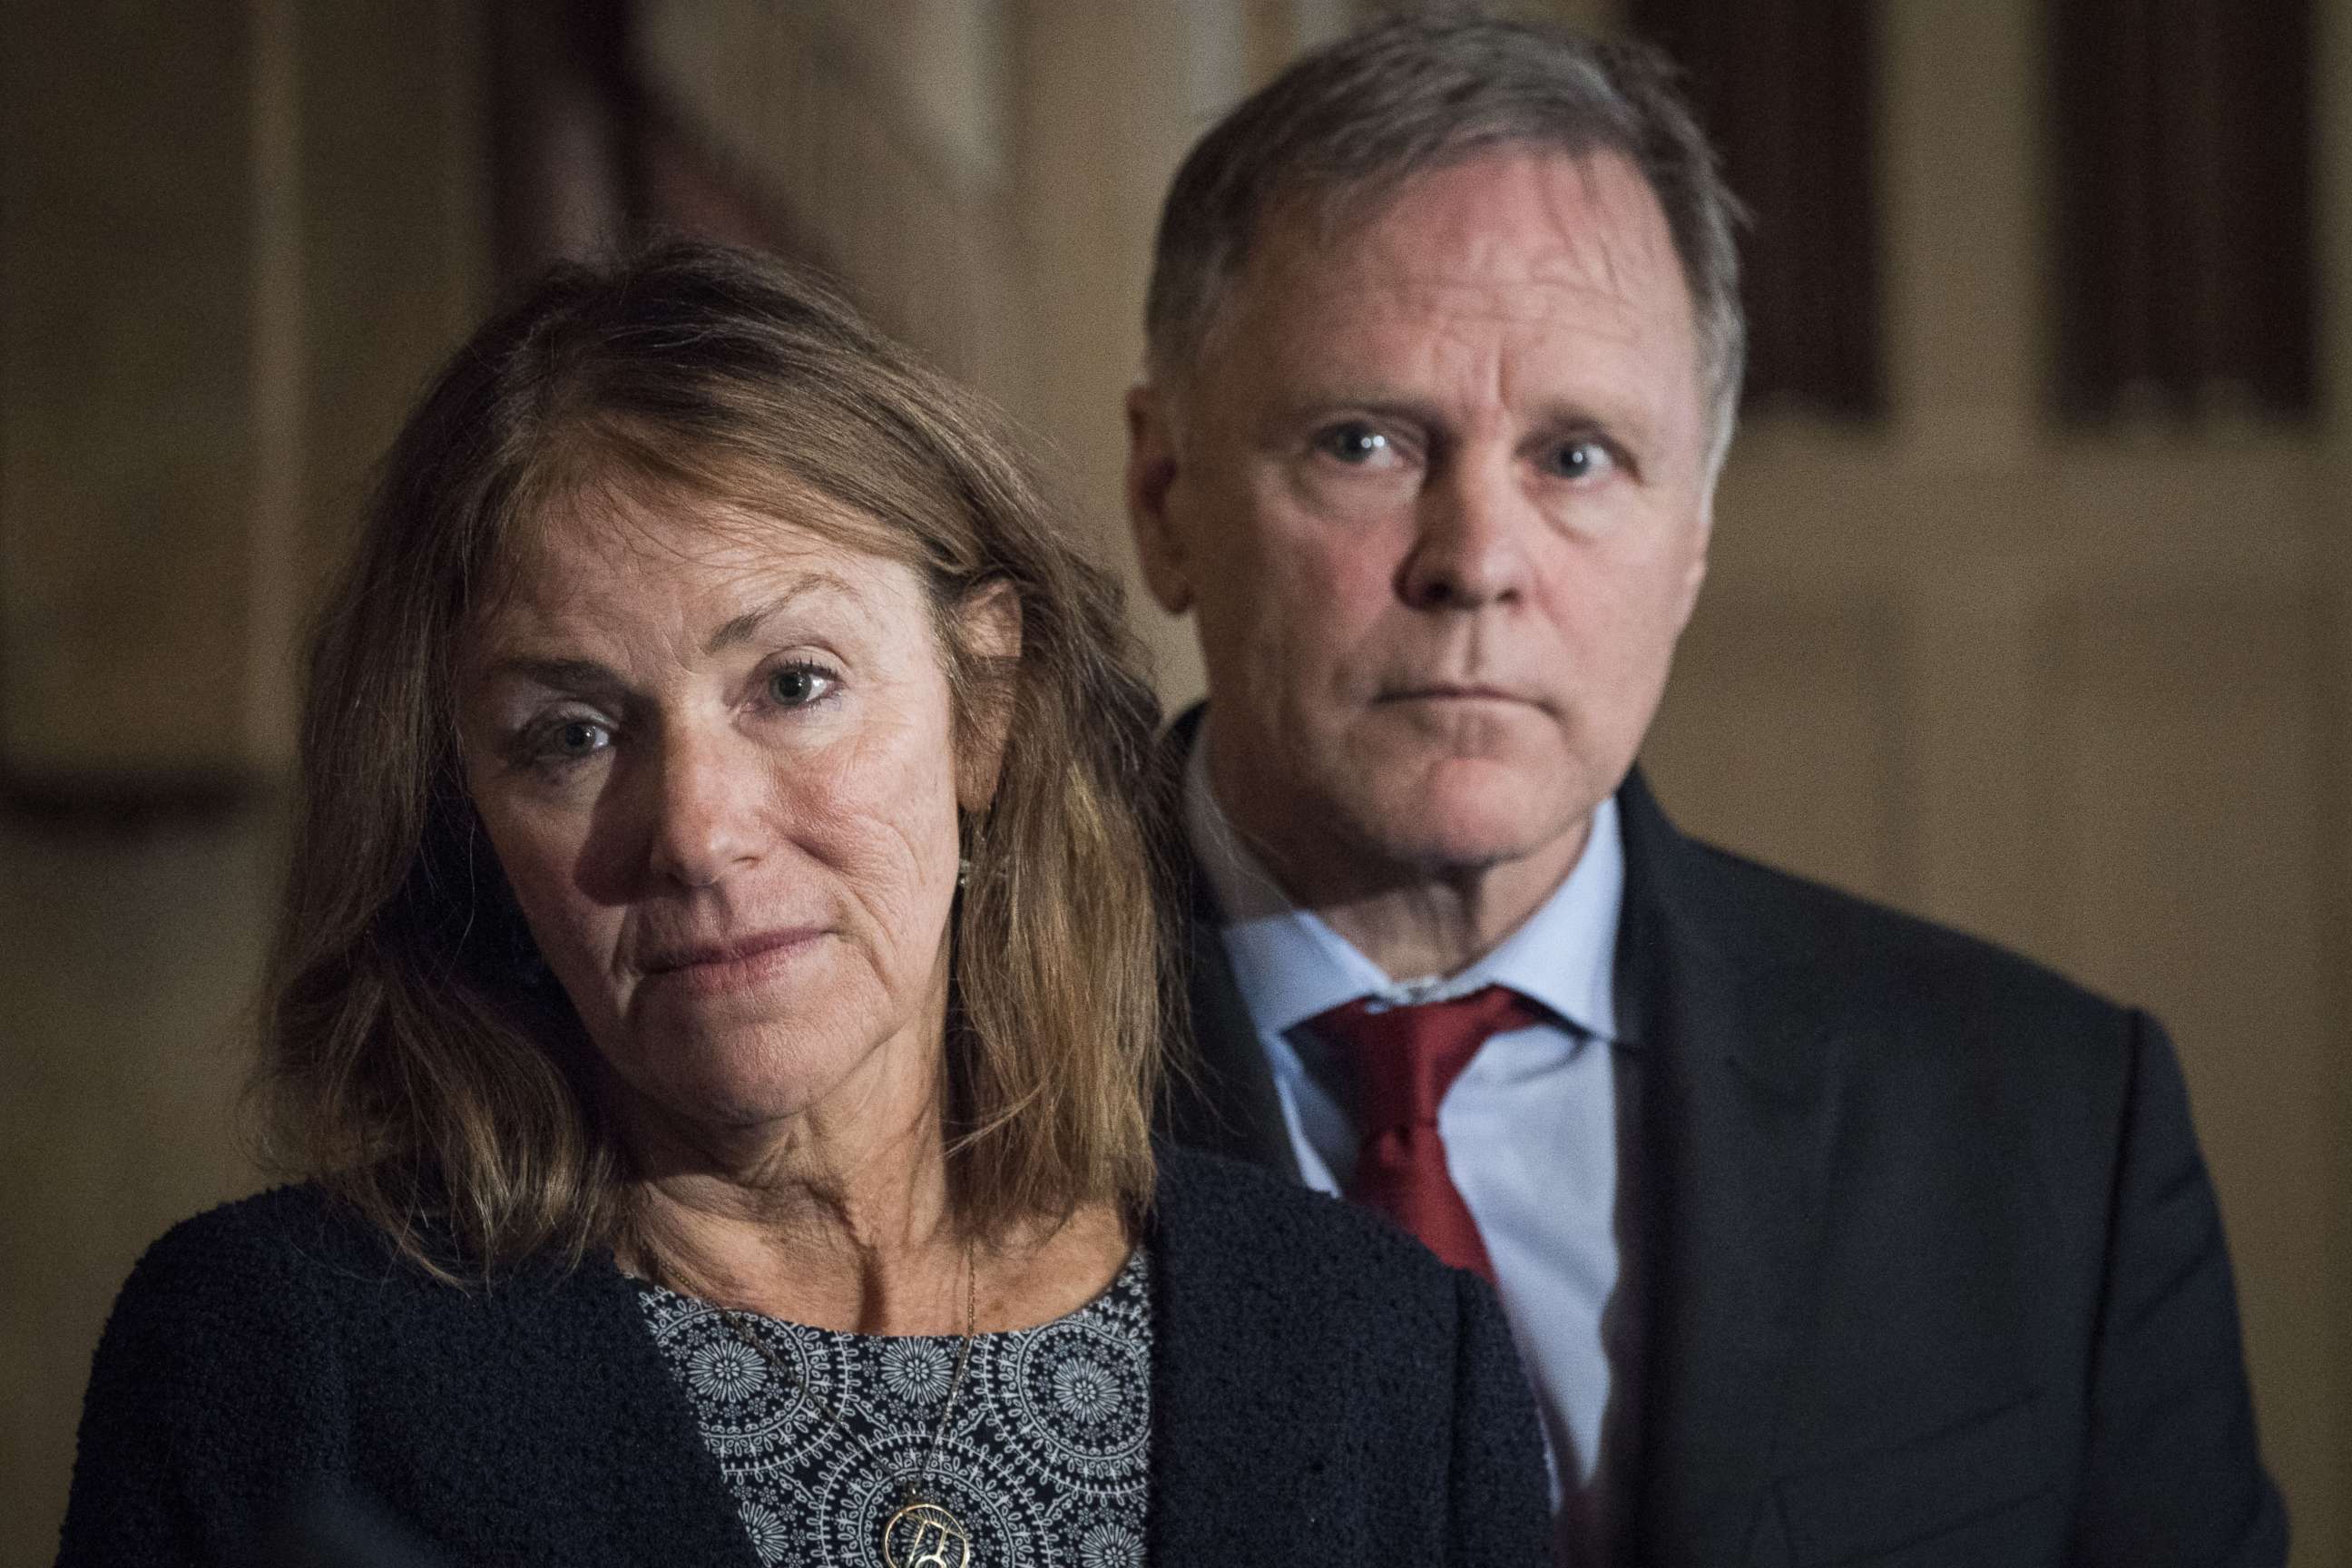 PHOTO: Cindy and Fred Warmbier, parents of Otto Warmbier, who died after being held prisoner in North Korea, listen during a press conference on Dec. 18, 2019 in Washington, D.C.